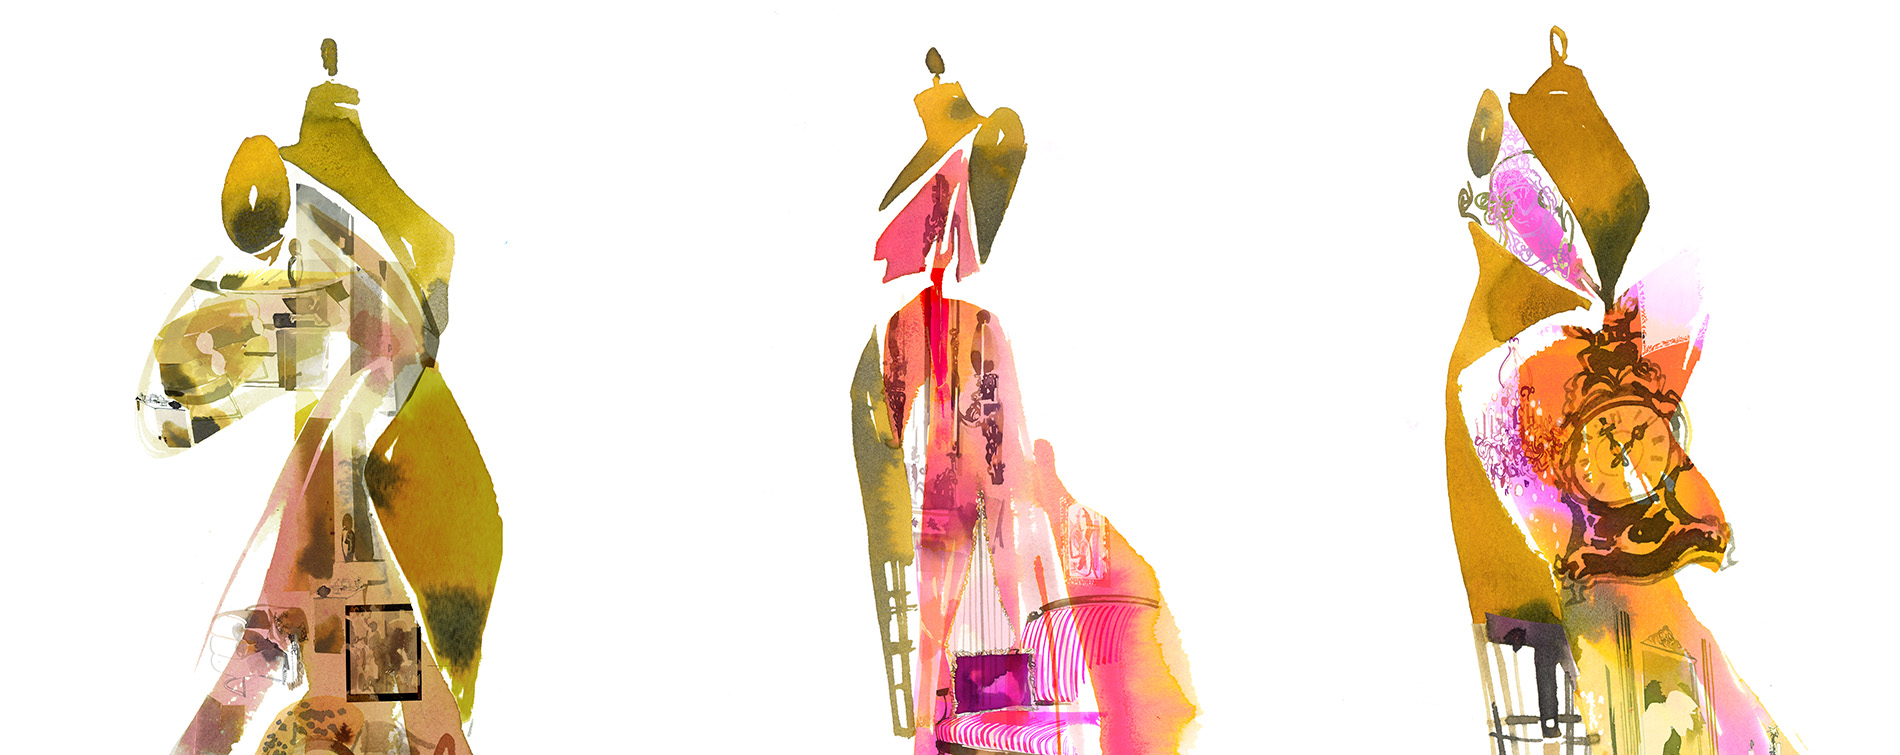 illustration of an interior superimposed on a pink dress on a dress form